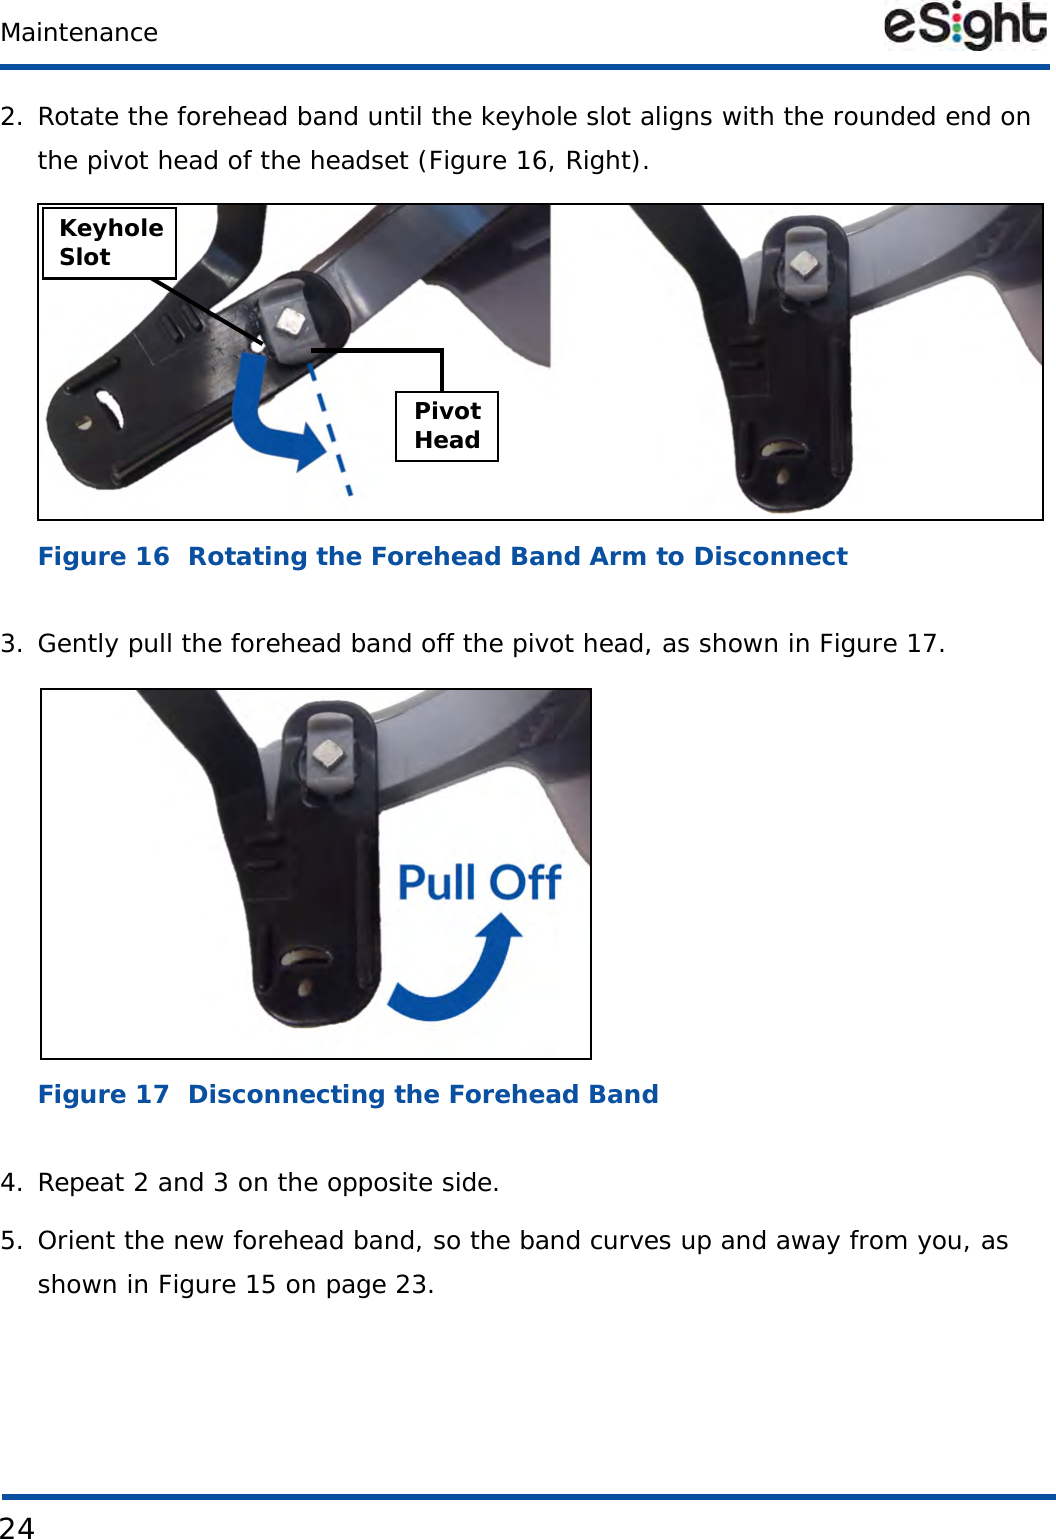 24Maintenance2. Rotate the forehead band until the keyhole slot aligns with the rounded end on the pivot head of the headset (Figure 16, Right).Figure 16  Rotating the Forehead Band Arm to Disconnect3. Gently pull the forehead band off the pivot head, as shown in Figure 17.Figure 17  Disconnecting the Forehead Band4. Repeat 2 and 3 on the opposite side.5. Orient the new forehead band, so the band curves up and away from you, as shown in Figure 15 on page 23.KeyholeSlotPivotHead